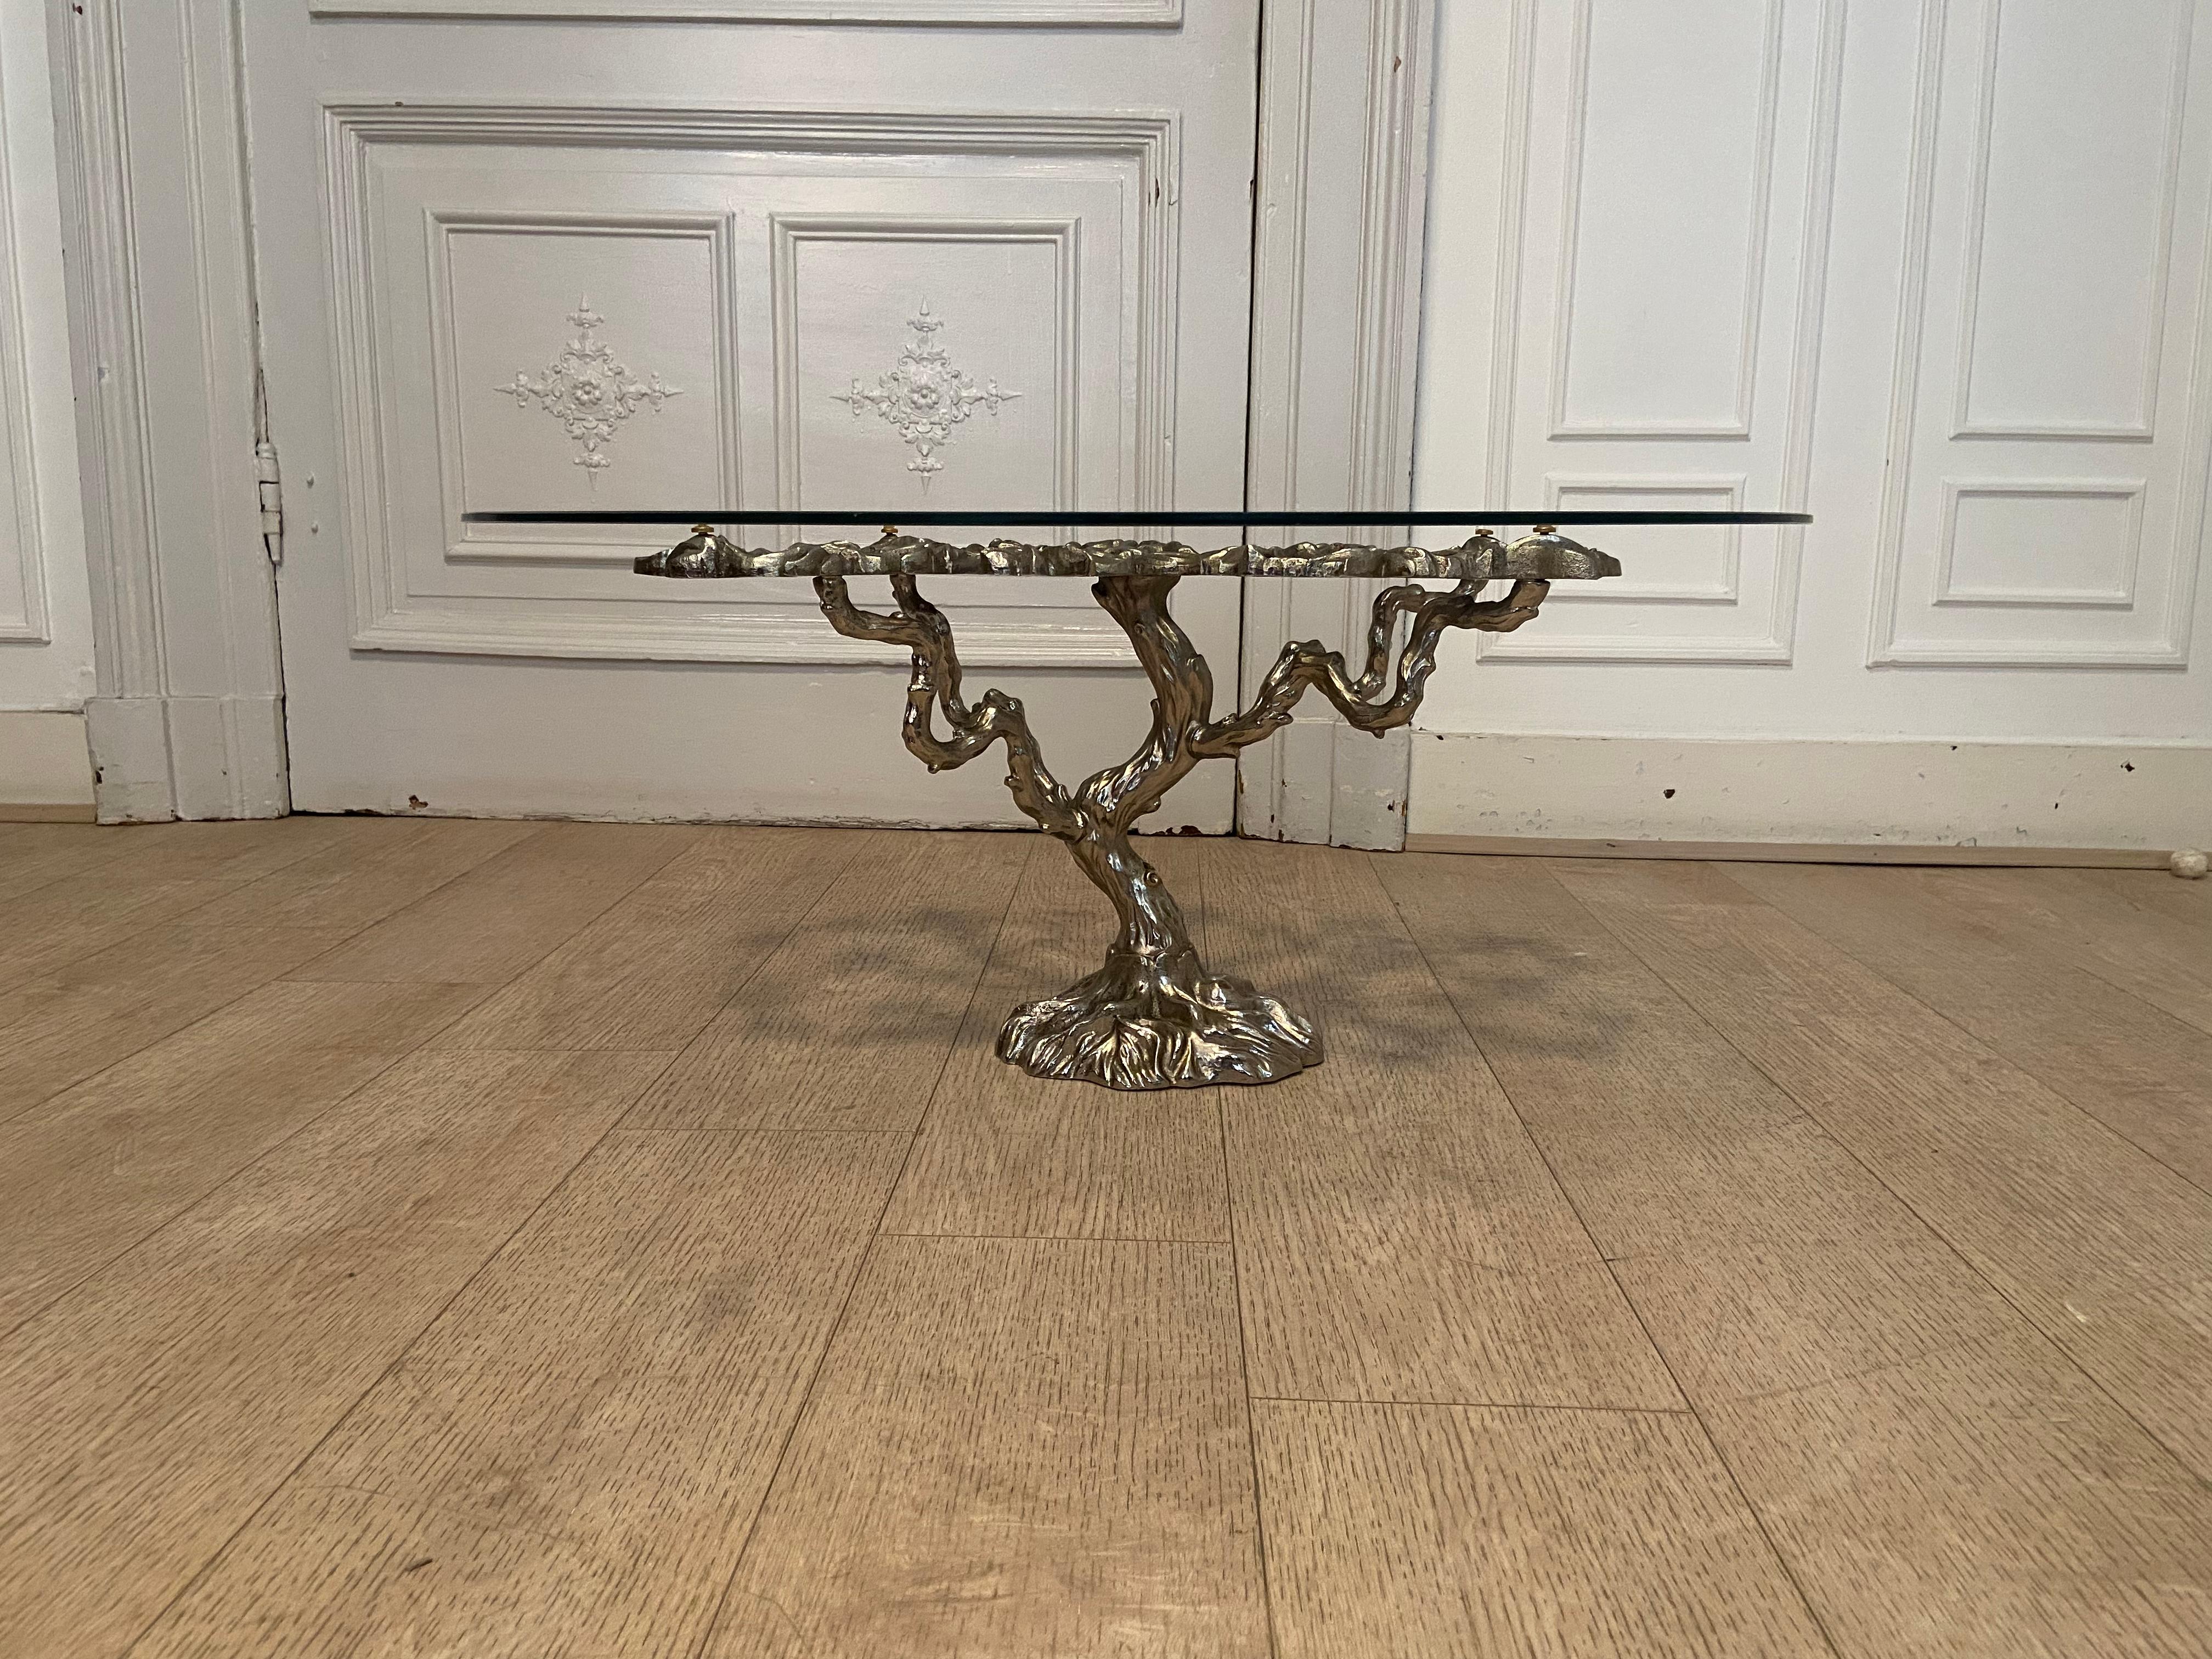 Mid century Coffee table in silver color from the 1970s design with vegetable pattern.